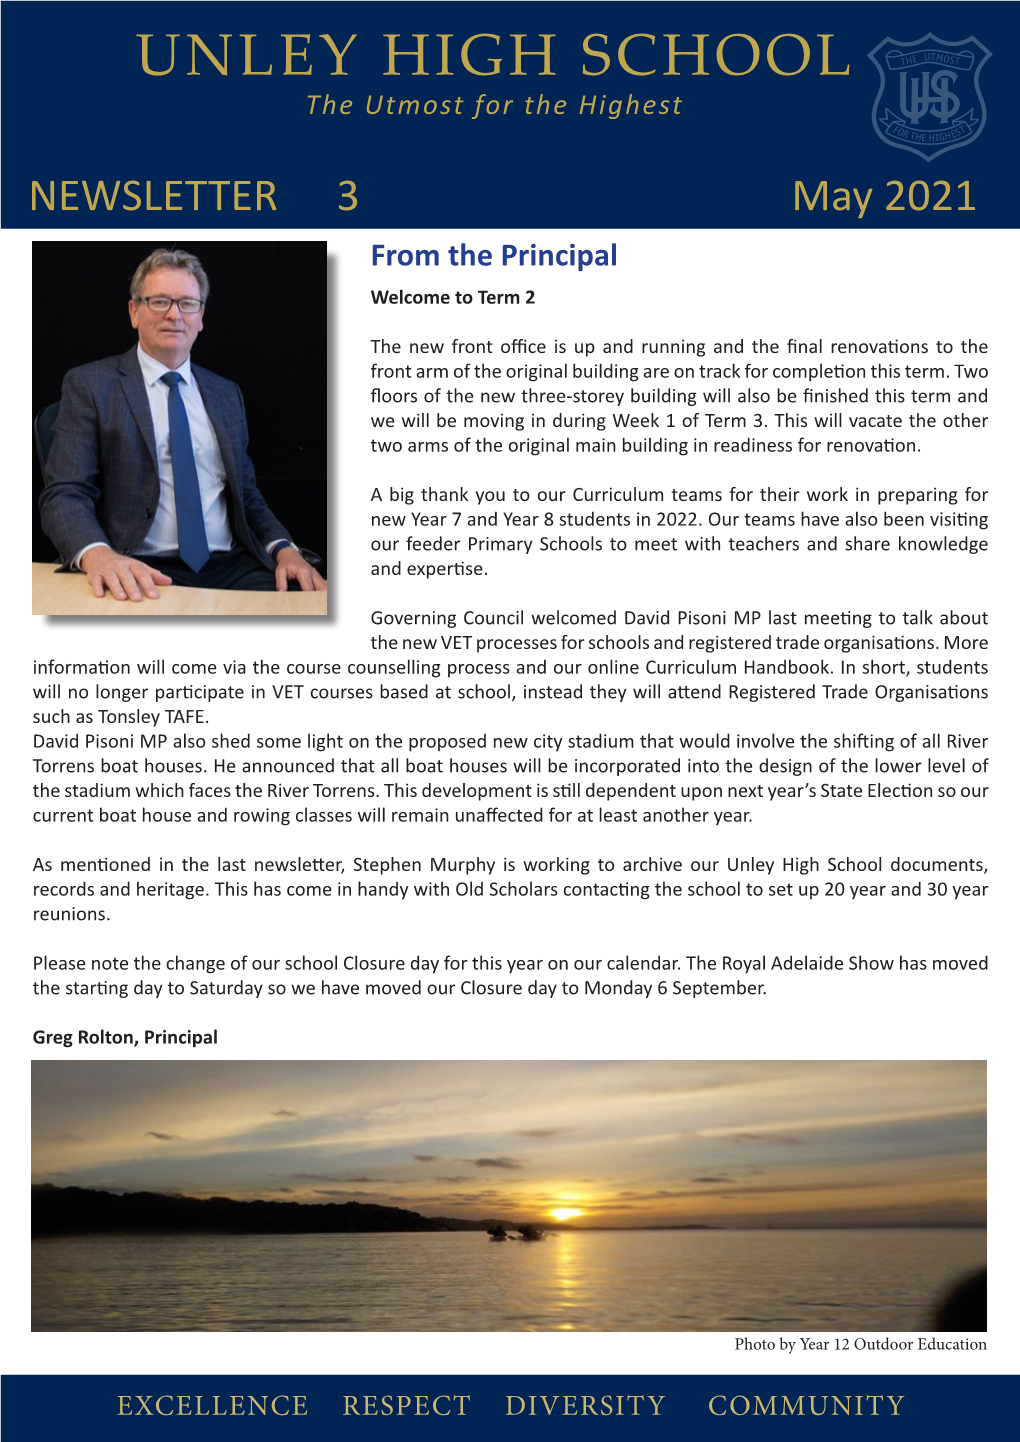 NEWSLETTER 3 May 2021 from the Principal Welcome to Term 2